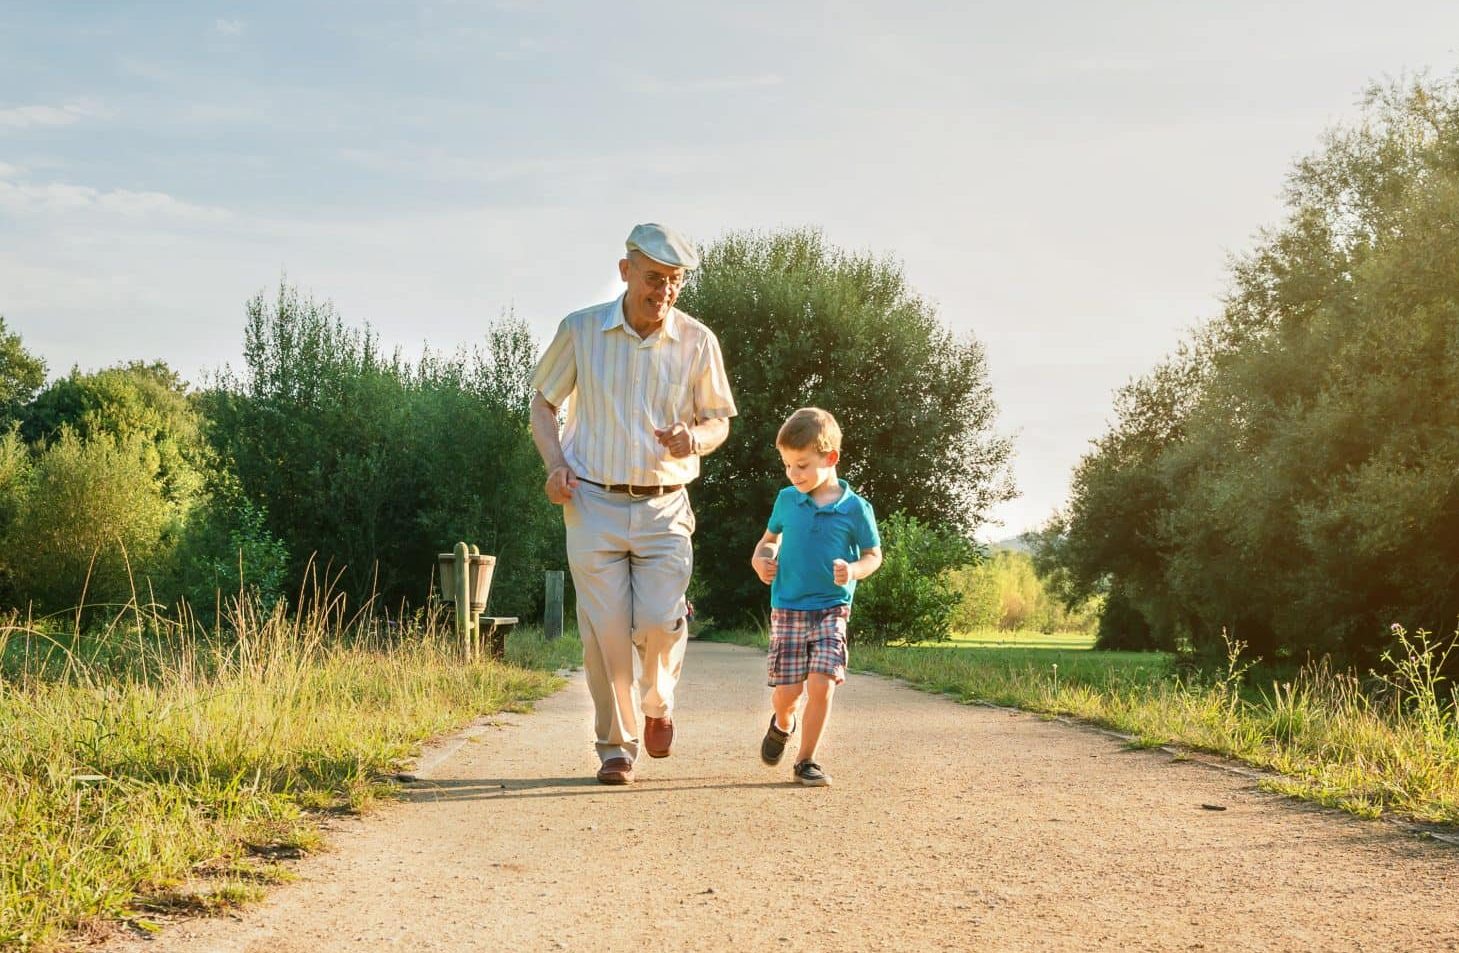 Grandparents rights. Accompanying image: Senior man and happy child running outdoors